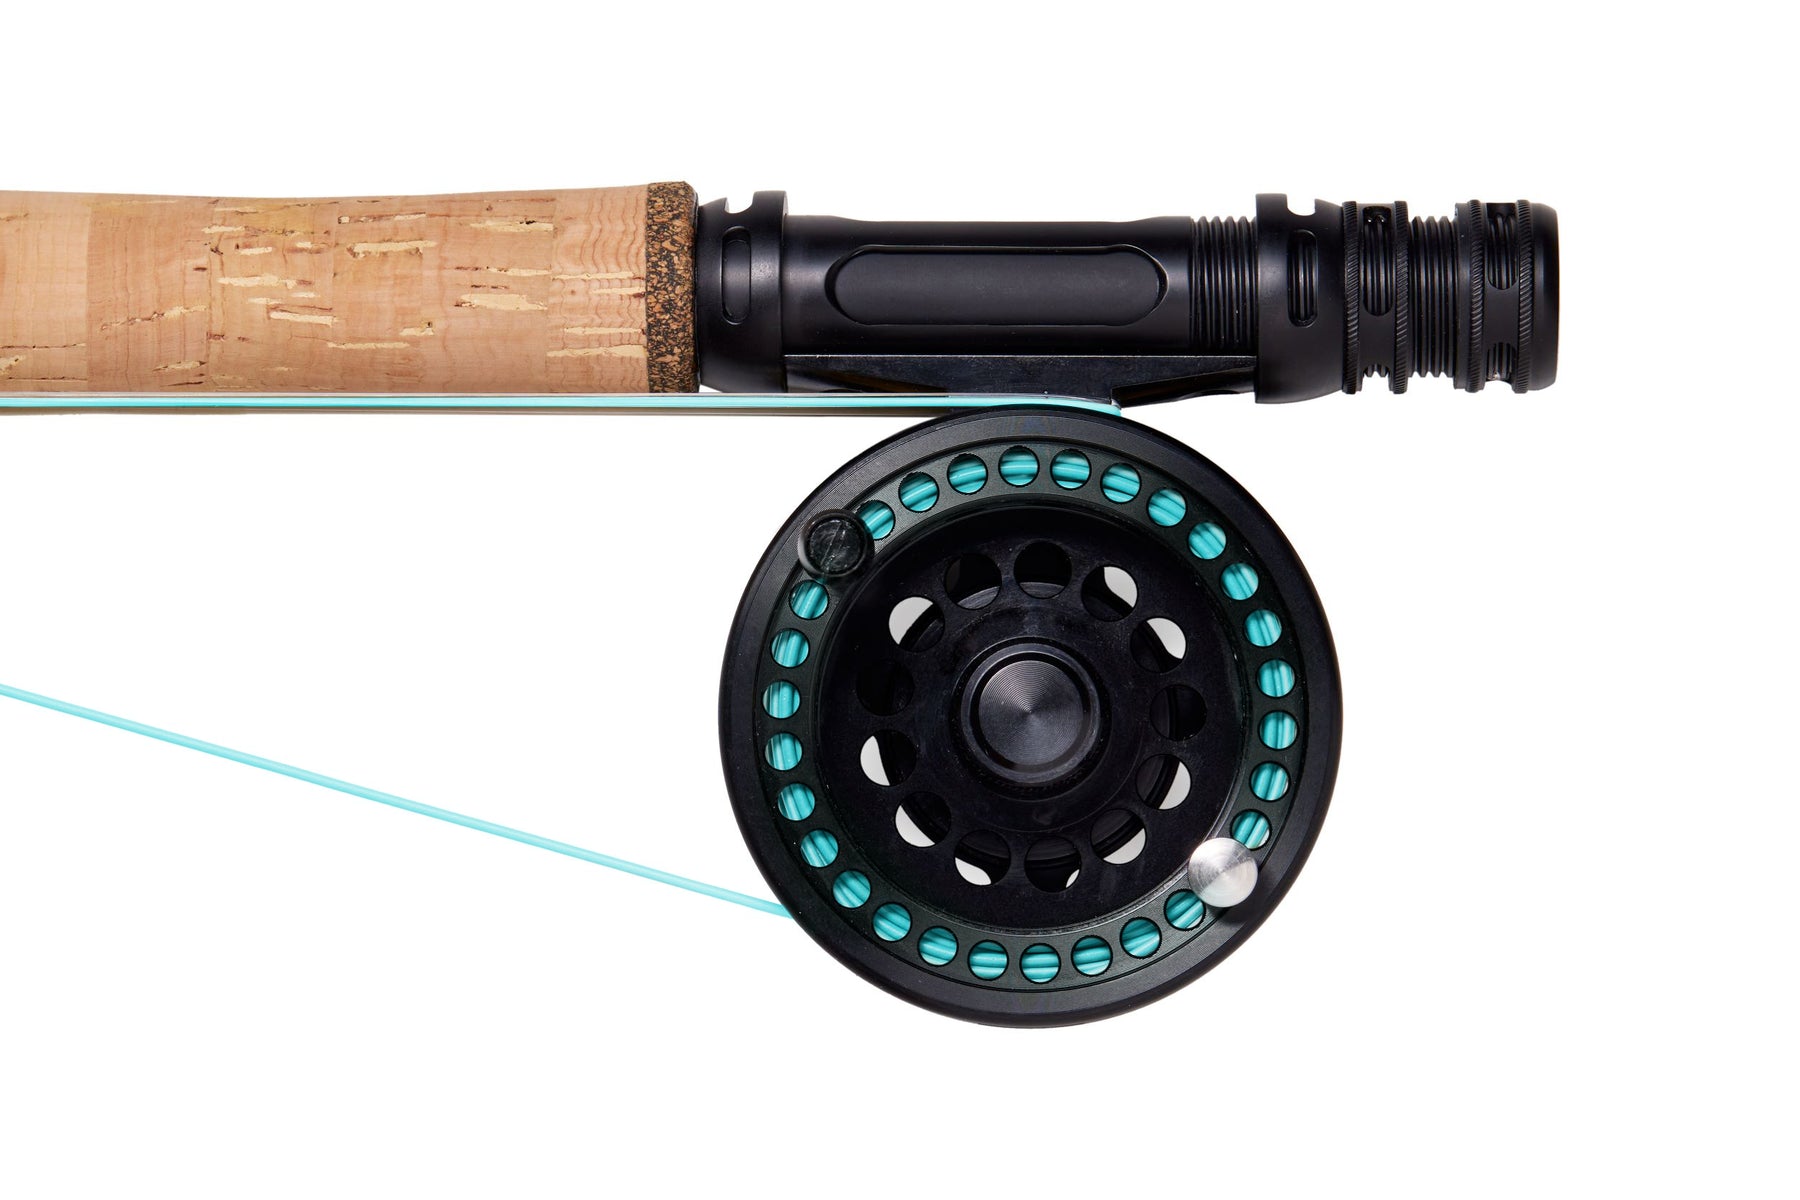 First Cast Telescoping Travel Fly Fishing Rod and Reel Combo | Portable 4WT  Fishing Gear for Trout, Bass, and Carp | Fast-Setup Performance